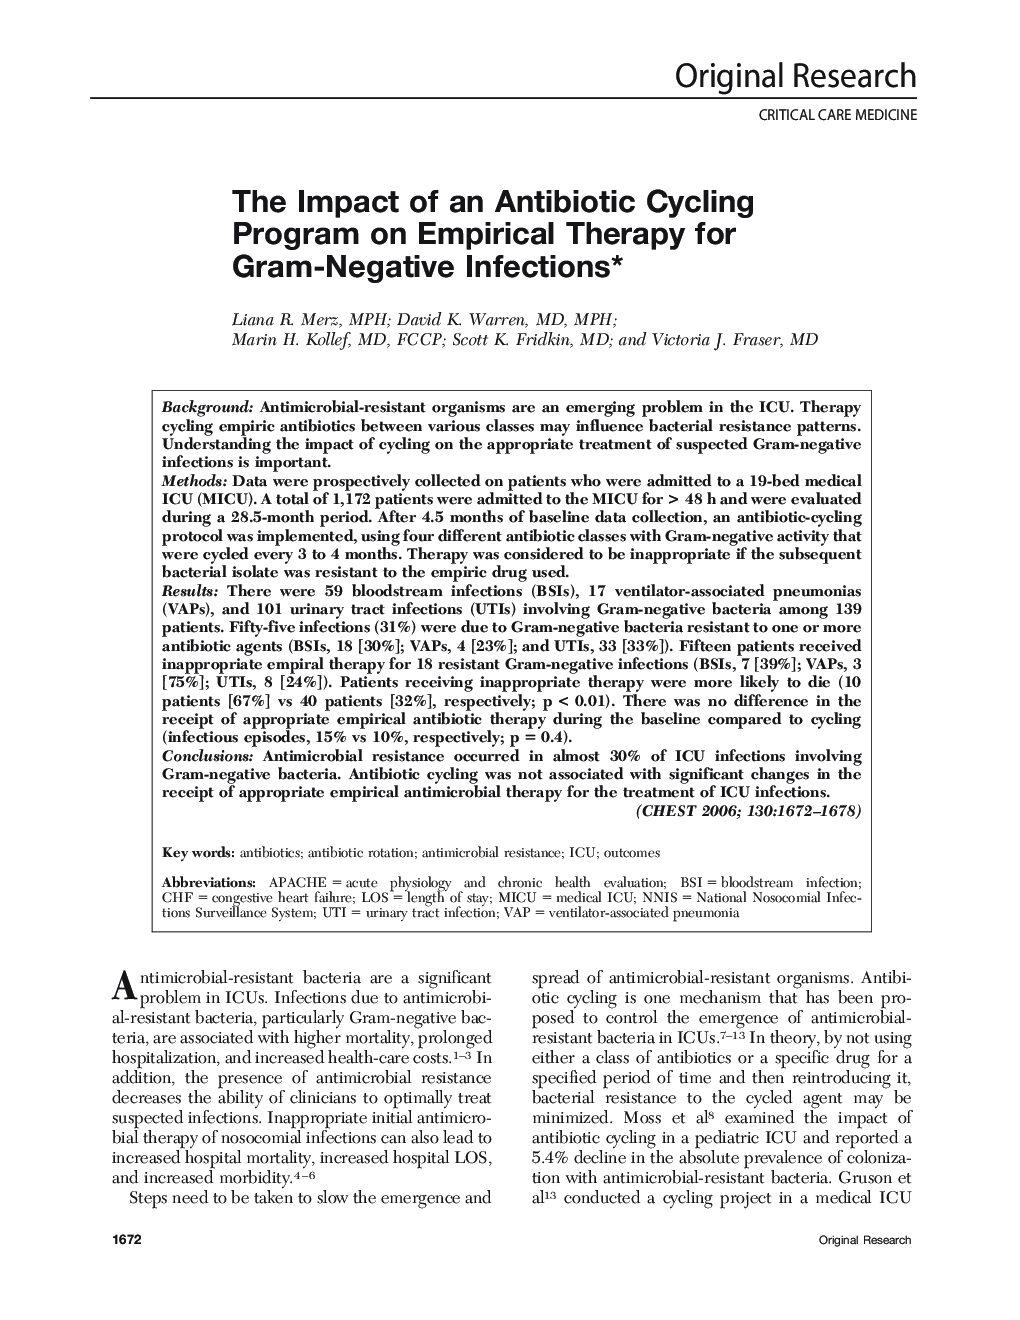 The Impact of an Antibiotic Cycling Program on Empirical Therapy for Gram-Negative Infections 